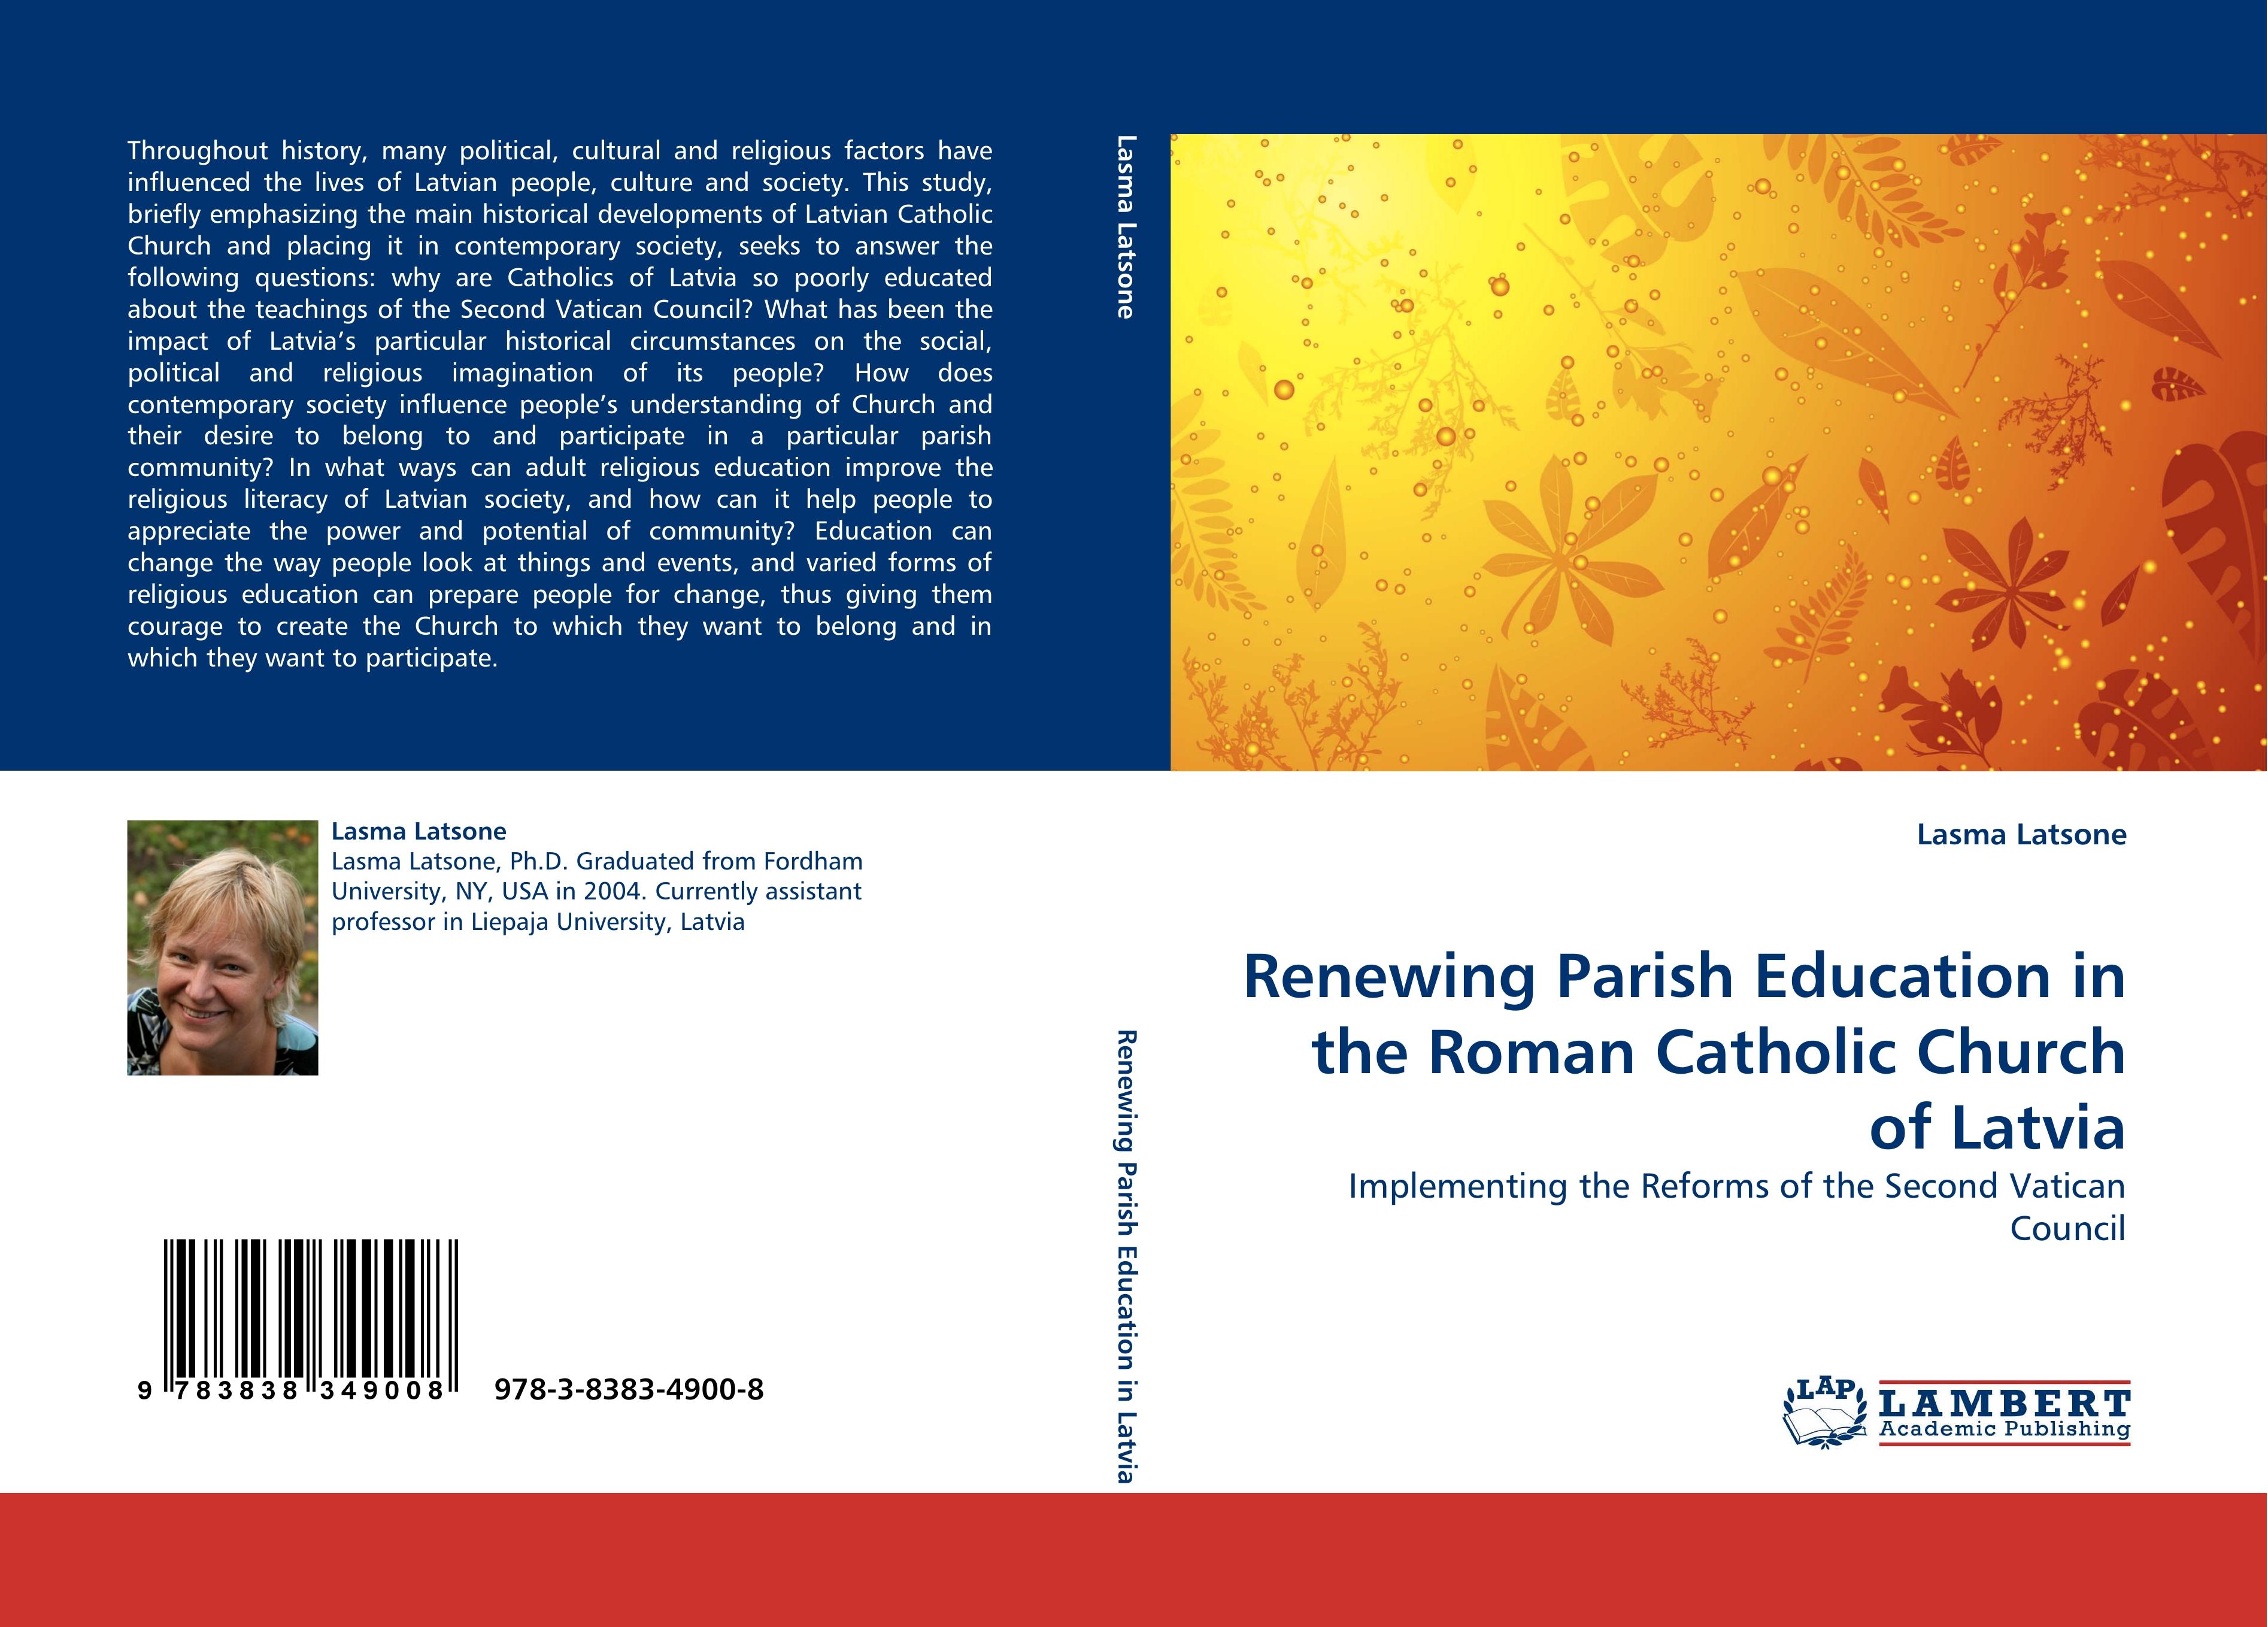 Renewing Parish Education in the Roman Catholic Church of Latvia | Implementing the Reforms of the Second Vatican Council | Lasma Latsone | Taschenbuch | Paperback | 176 S. | Englisch | 2010 - Latsone, Lasma